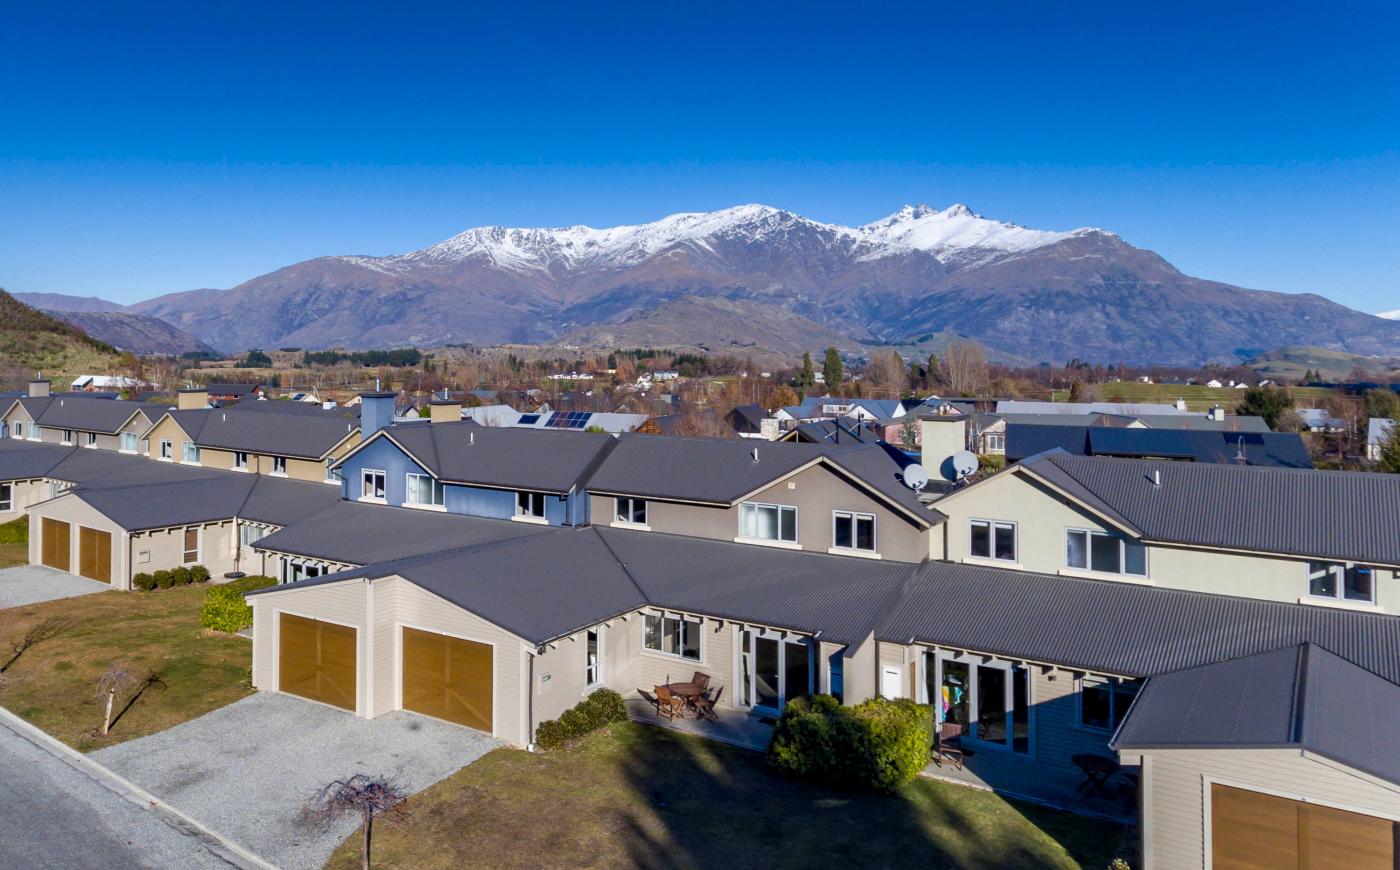 Aerial view of Arrowfield Apartments with snow-capped mountains in the background